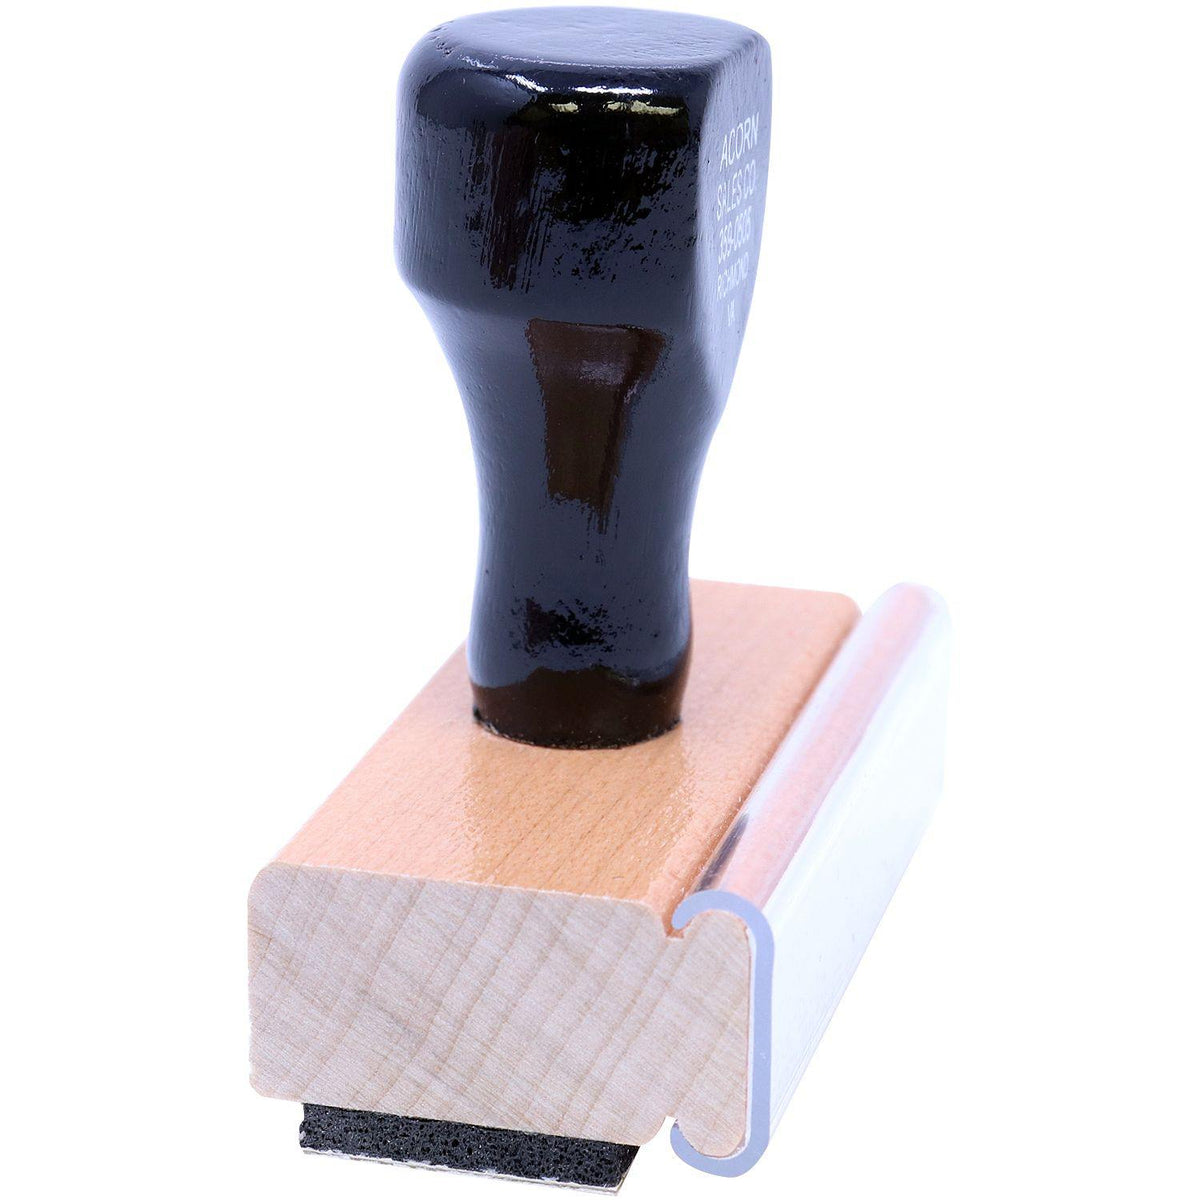 Side View of Closed Rubber Stamp at an Angle